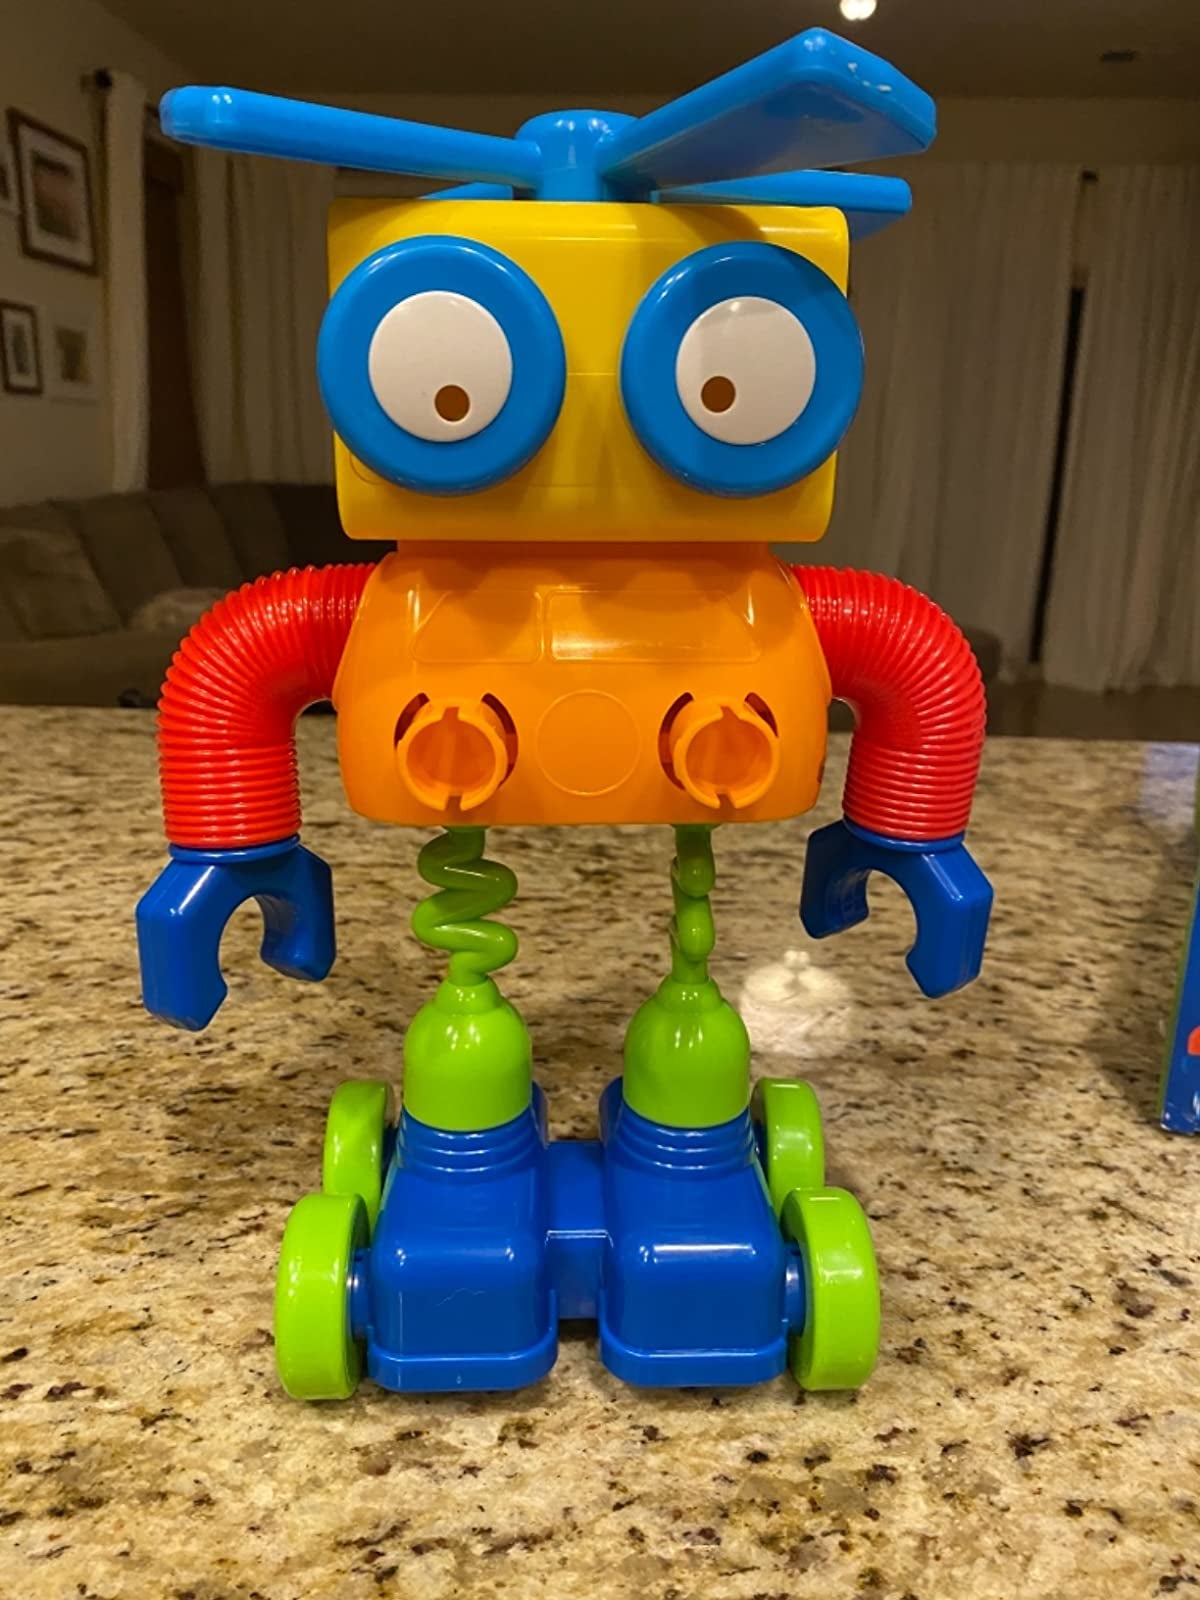 Reviewer's image of primary colored robot toy